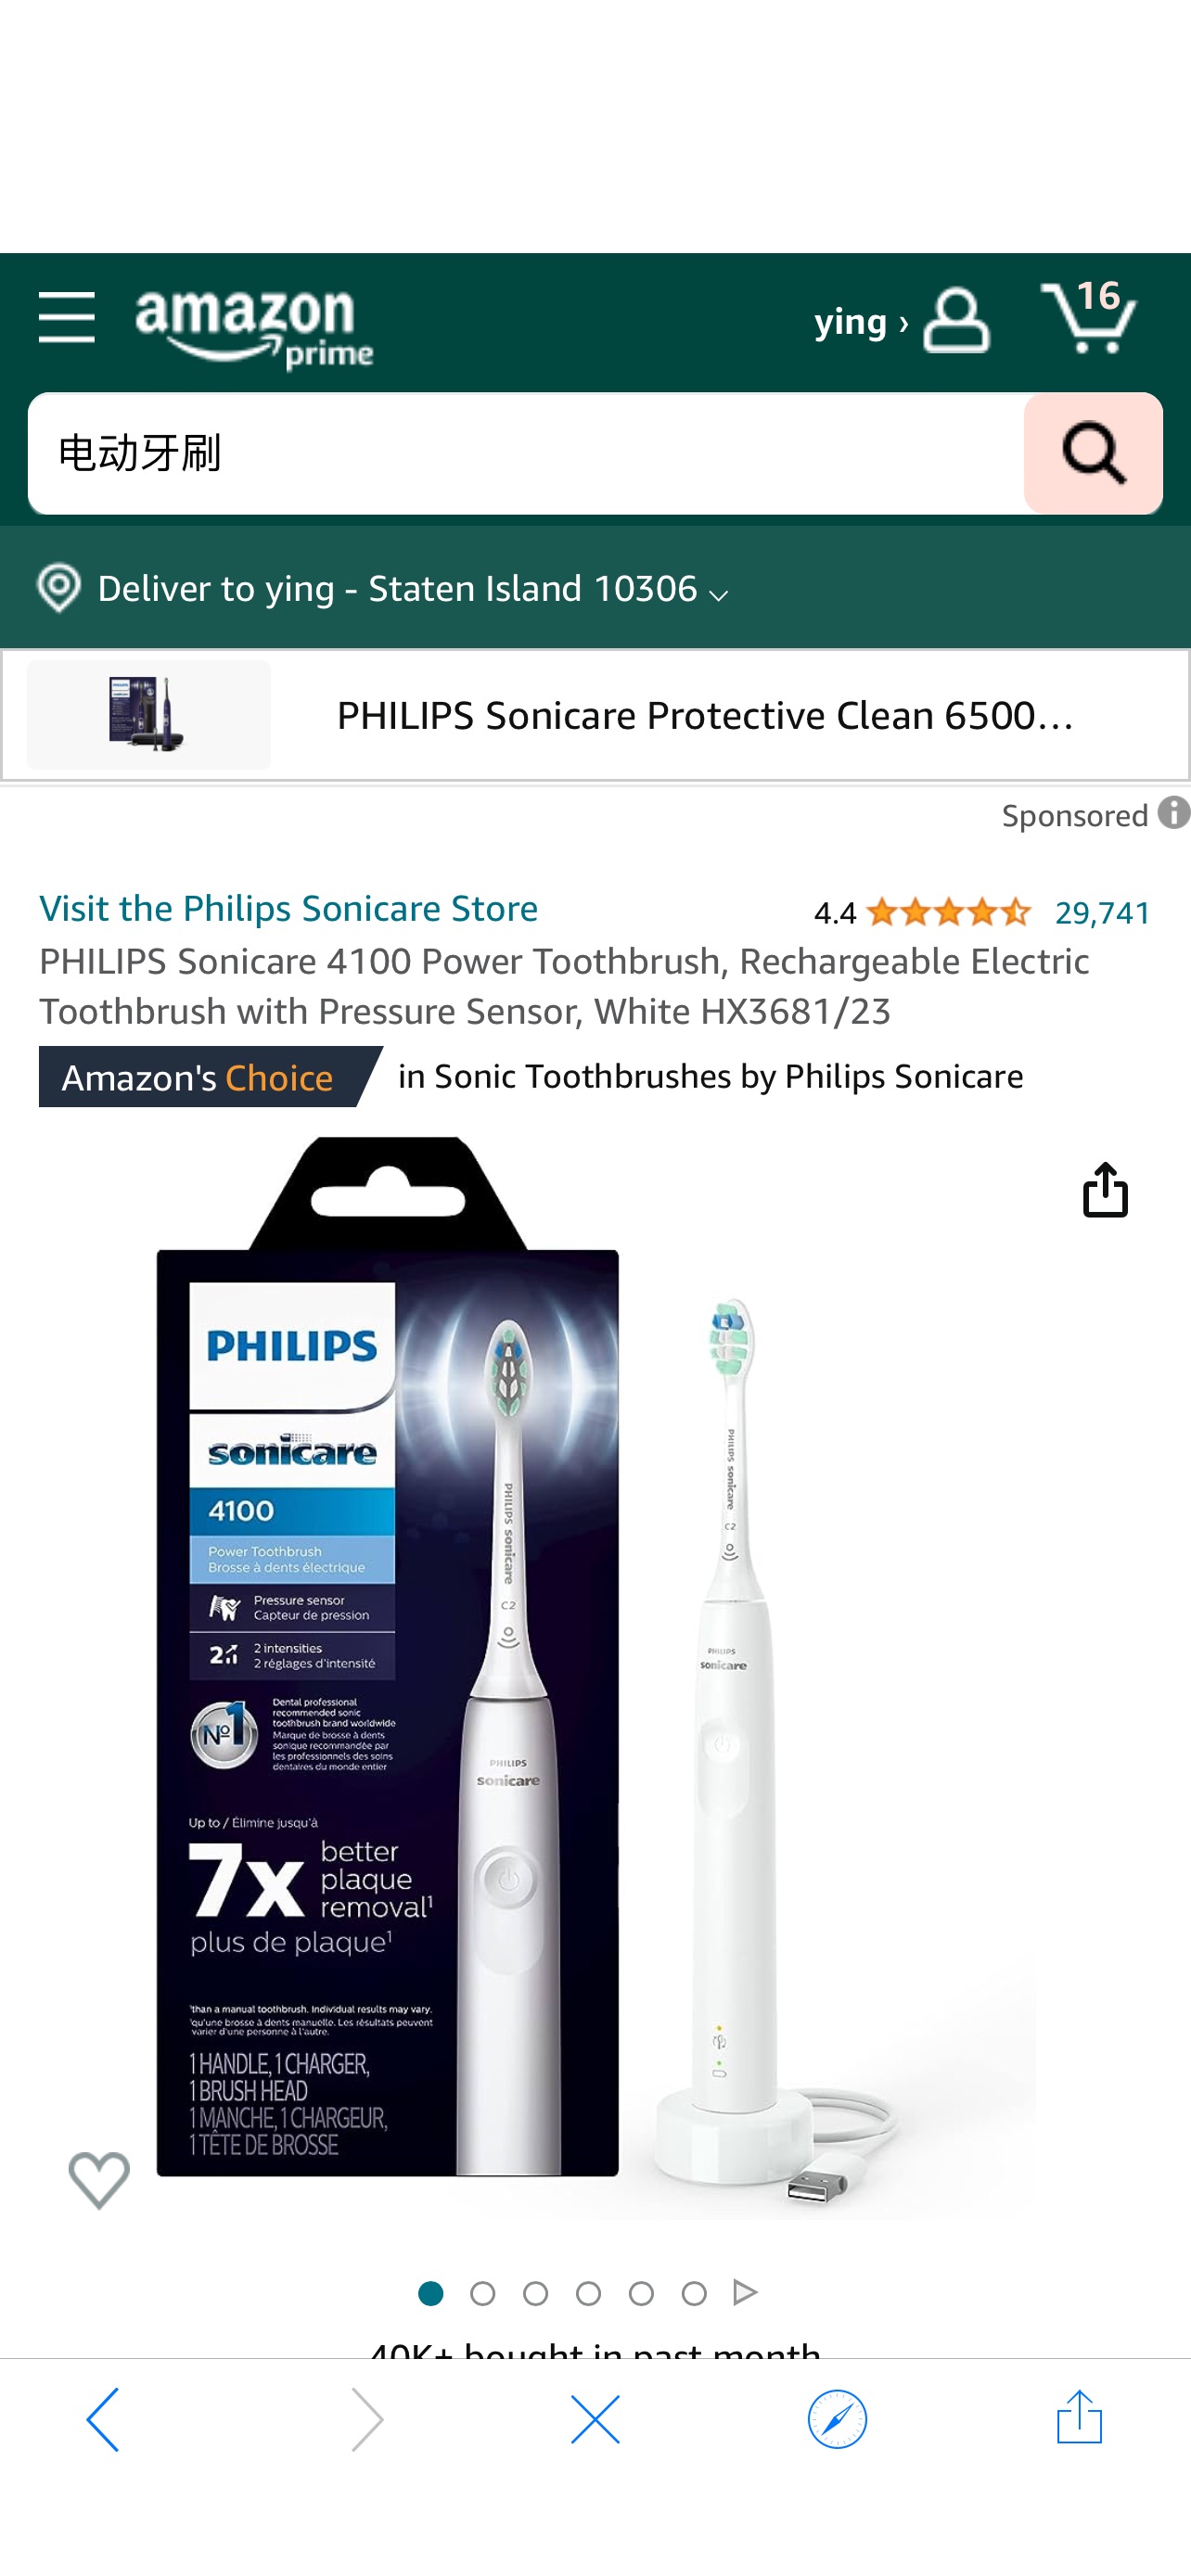 Amazon.com: PHILIPS Sonicare 4100 Power Toothbrush, Rechargeable Electric Toothbrush with Pressure Sensor, White HX3681/23 : Health & Household